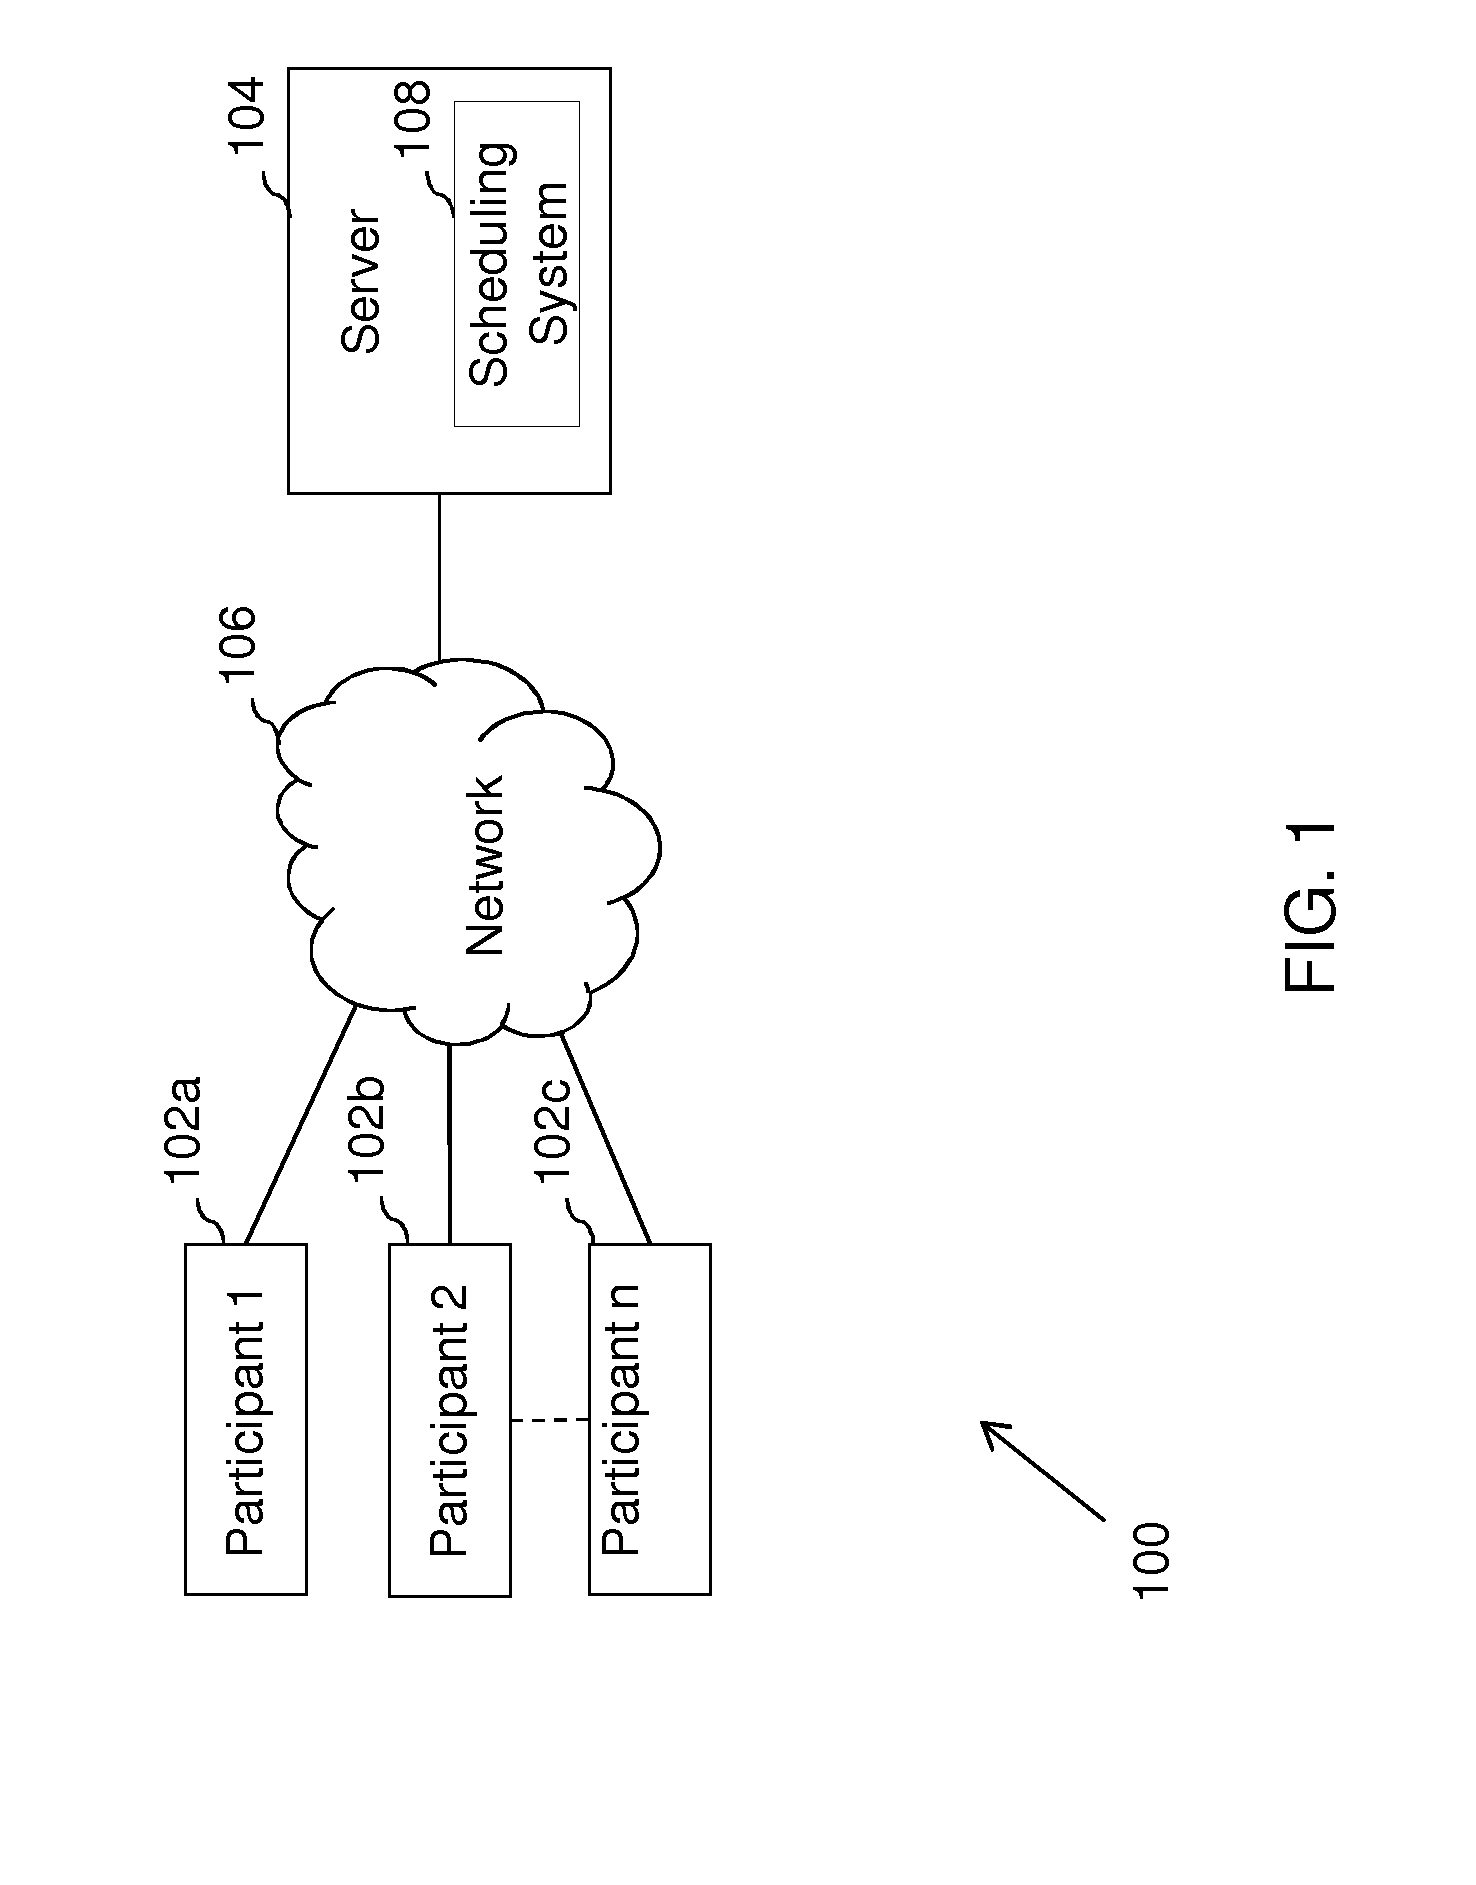 System and method for facilitating scheduling of events